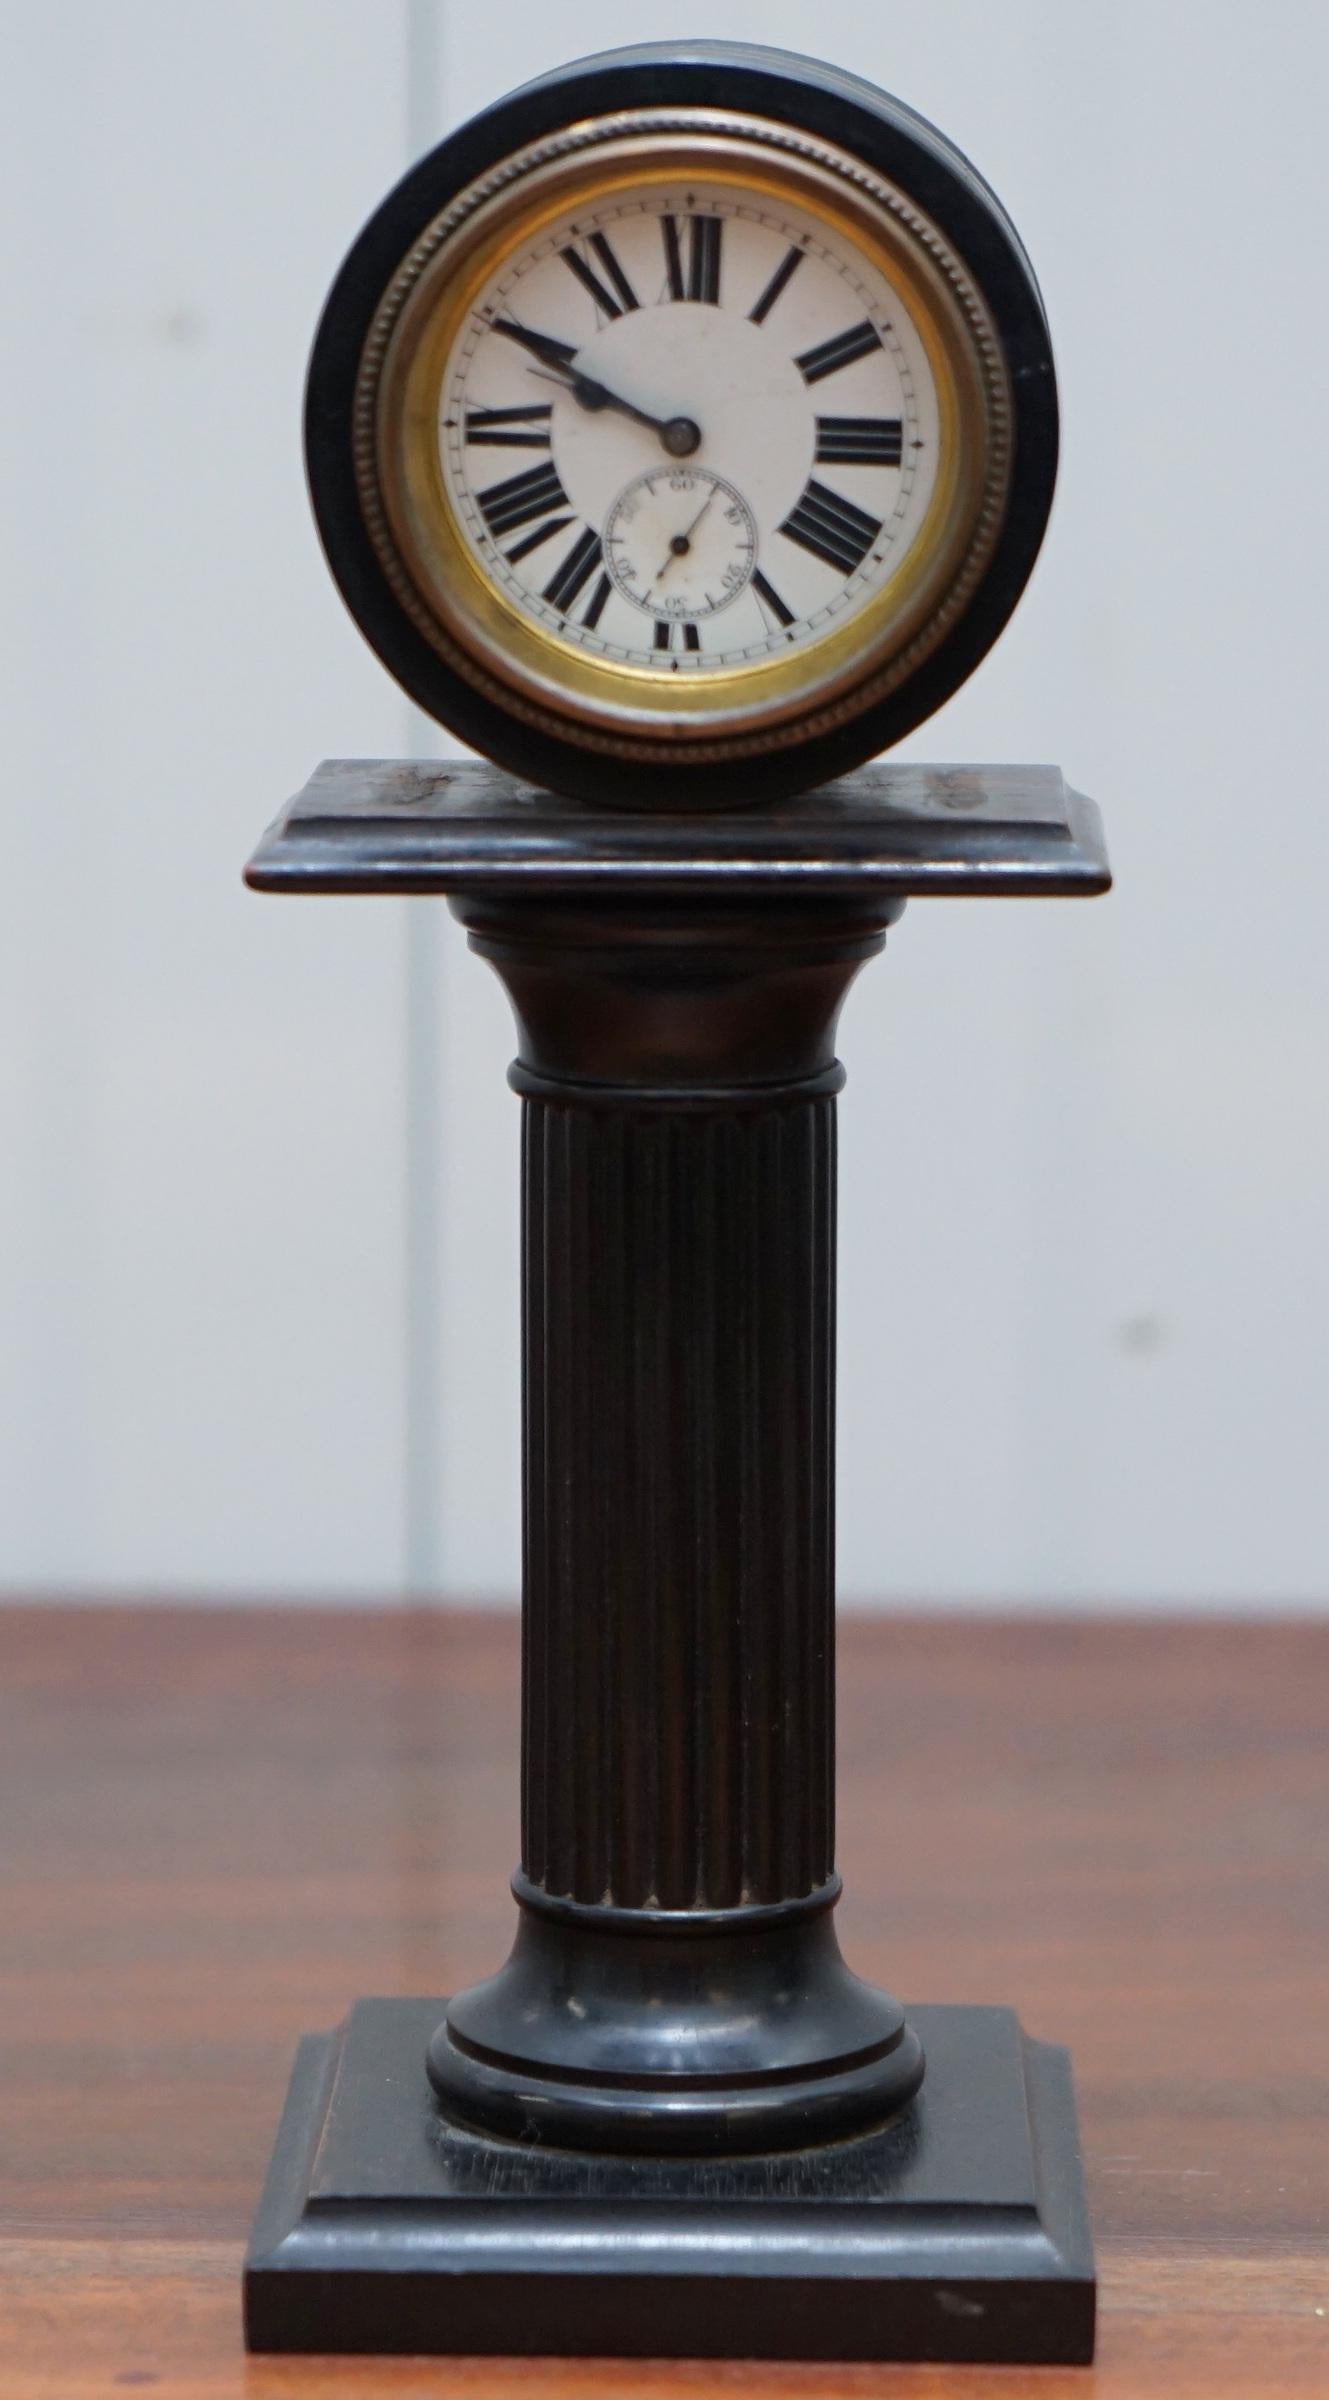 We are delighted to offer for sale this very rare 19th-century small mantle clock of a subtle pillar or column with original paint

A very lovely clock, the clock face itself is hand painted on white porcelain, its exquisite work, the movement is